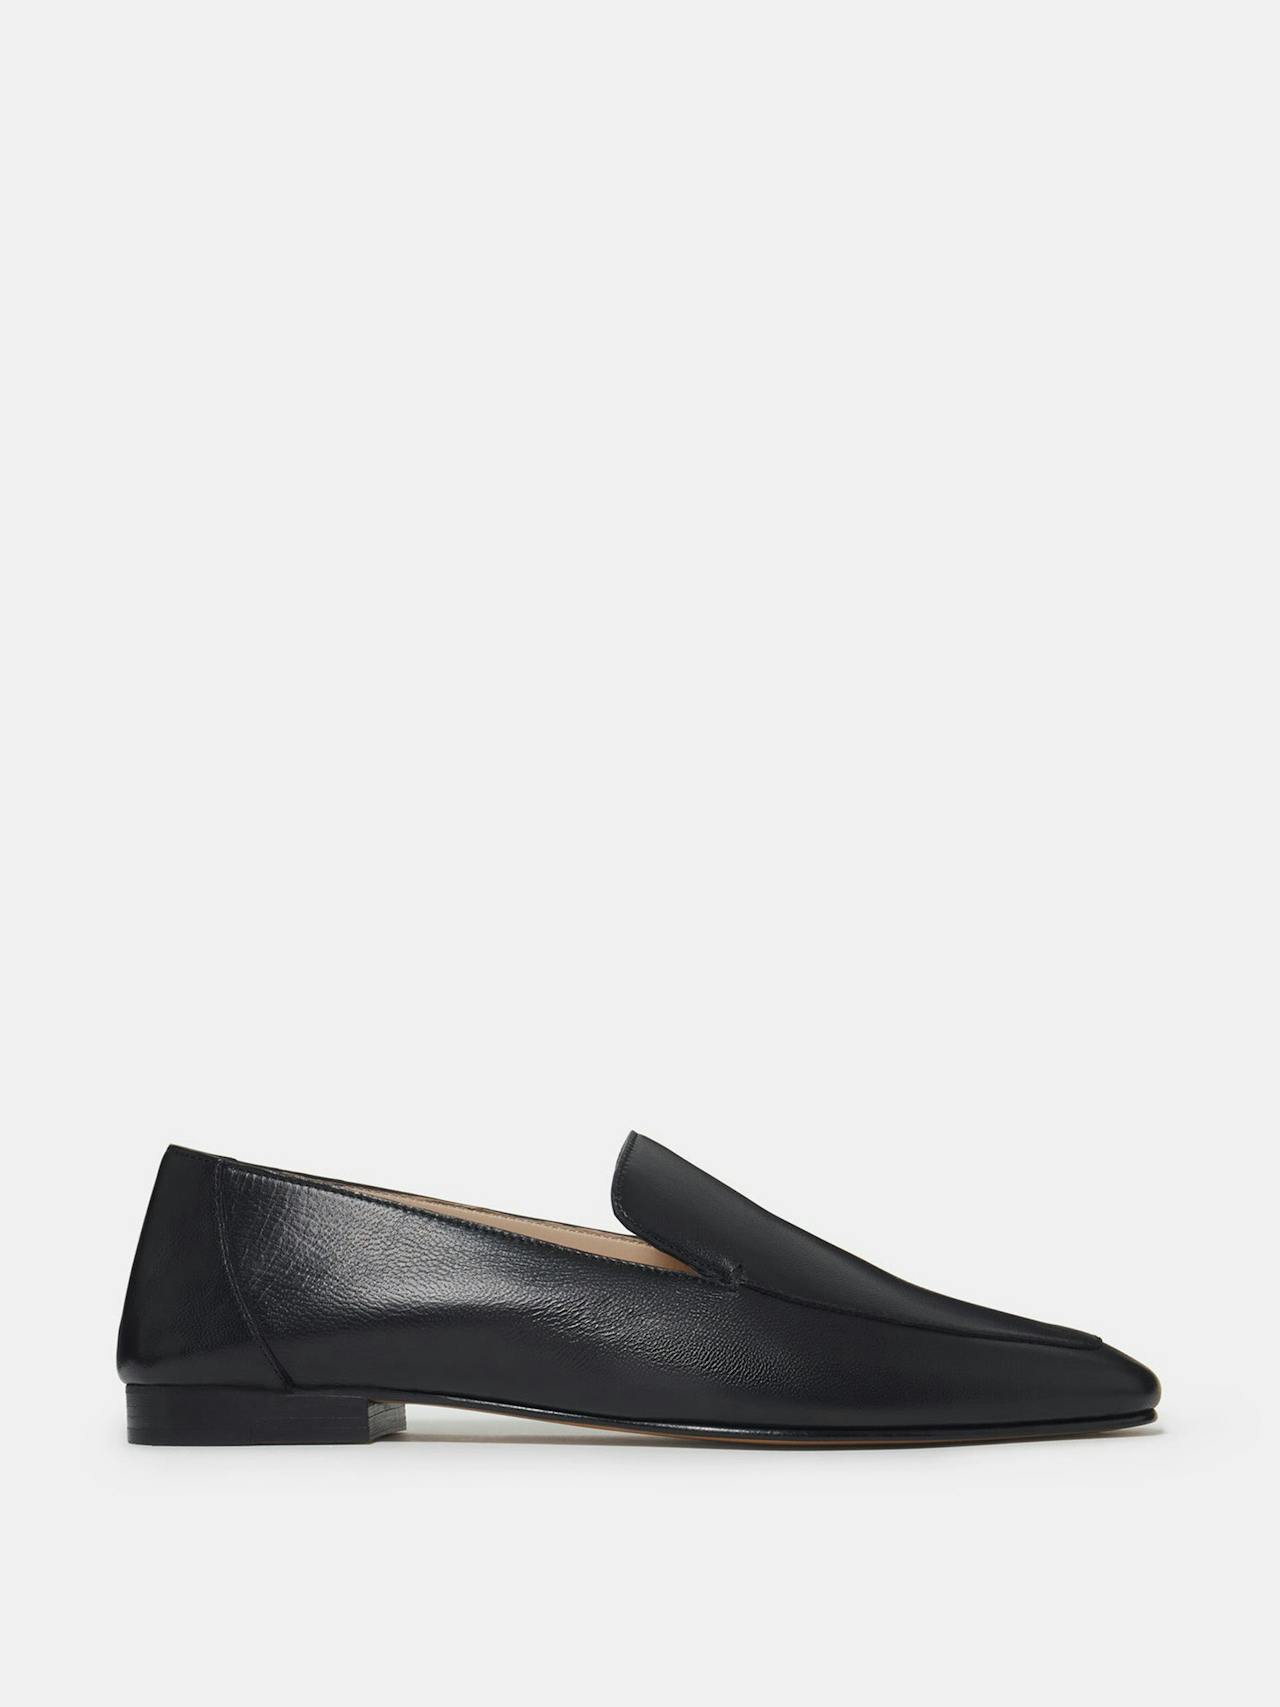 Black leather soft loafers